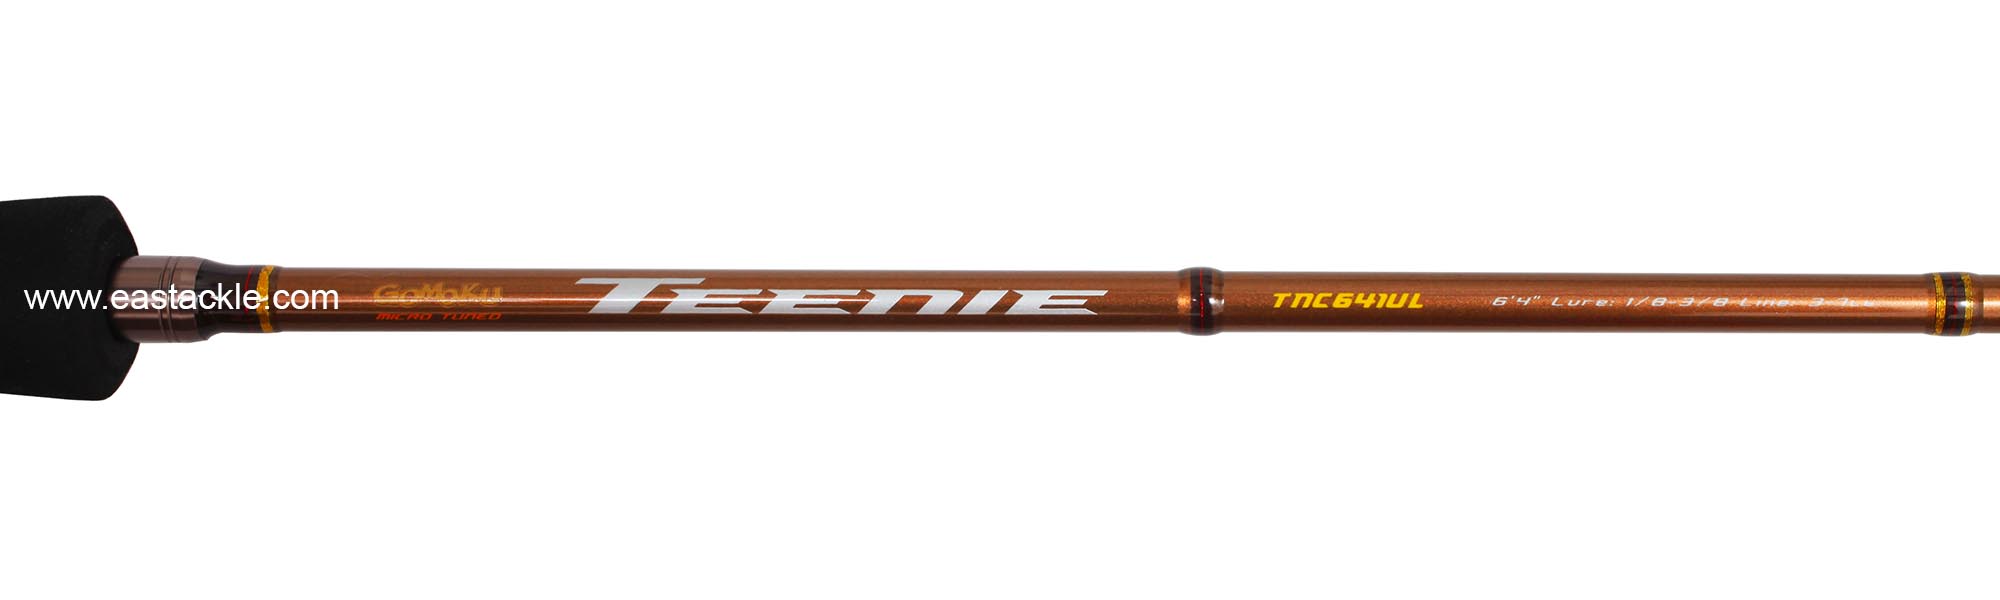 Storm - Teenie - TNC641UL - Bait Casting Rod - Logo and Blank Specifications (Top Viiew) | Eastackle